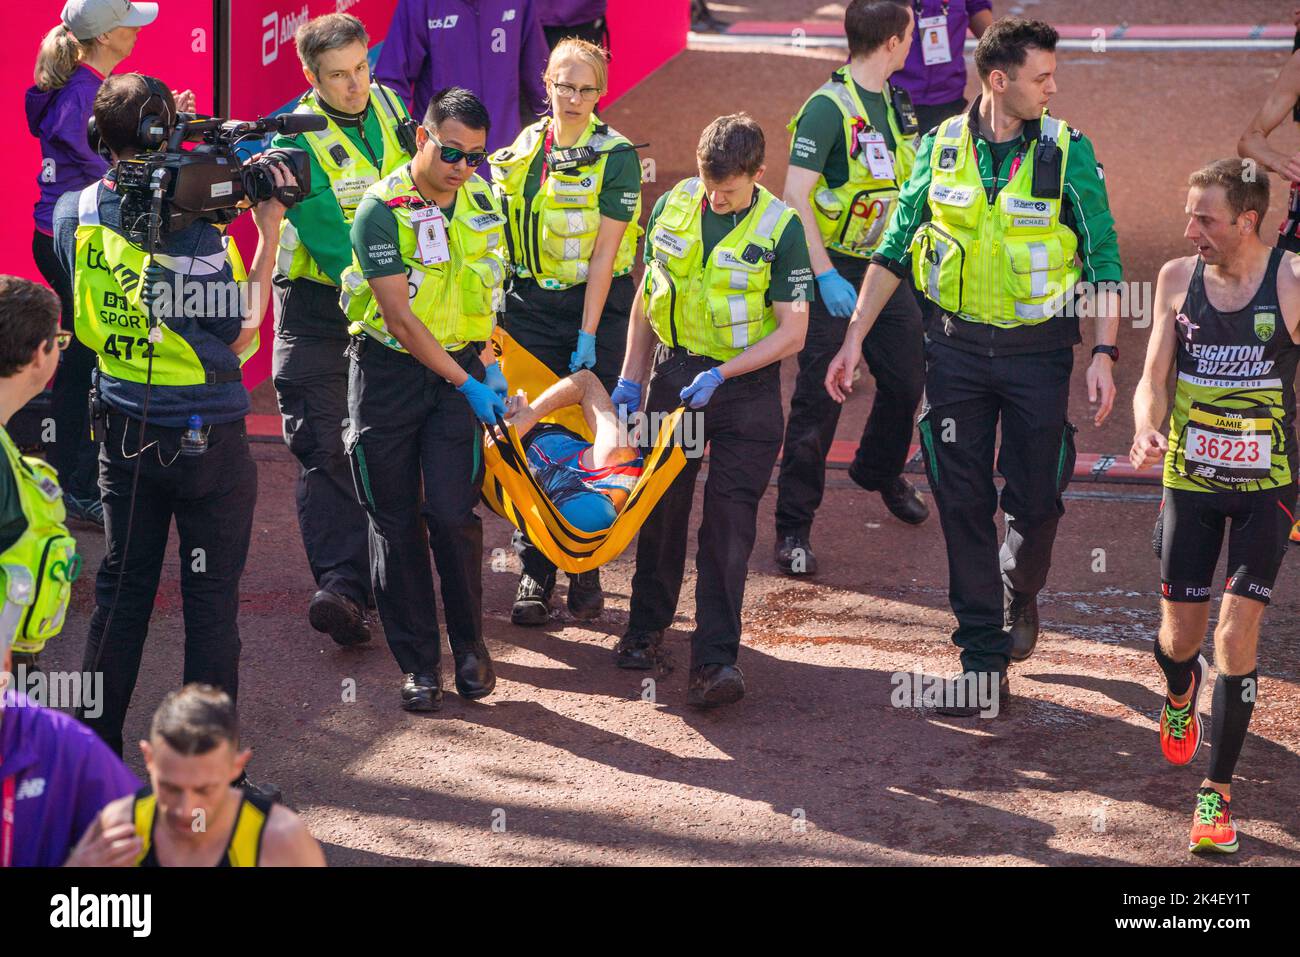 London UK. 2 October 2022 . Marathon runners is carried  on a stretcher by paramedics after crossing the finishing line at The Mall .More than  40,000 athletes including  elite  runners, club runners and fun runners   take  part in the London Marathon sponsored by TCS Tata Consultancy Services over a 26.2 mile course.Credit: amer ghazzal/Alamy Live News. Stock Photo